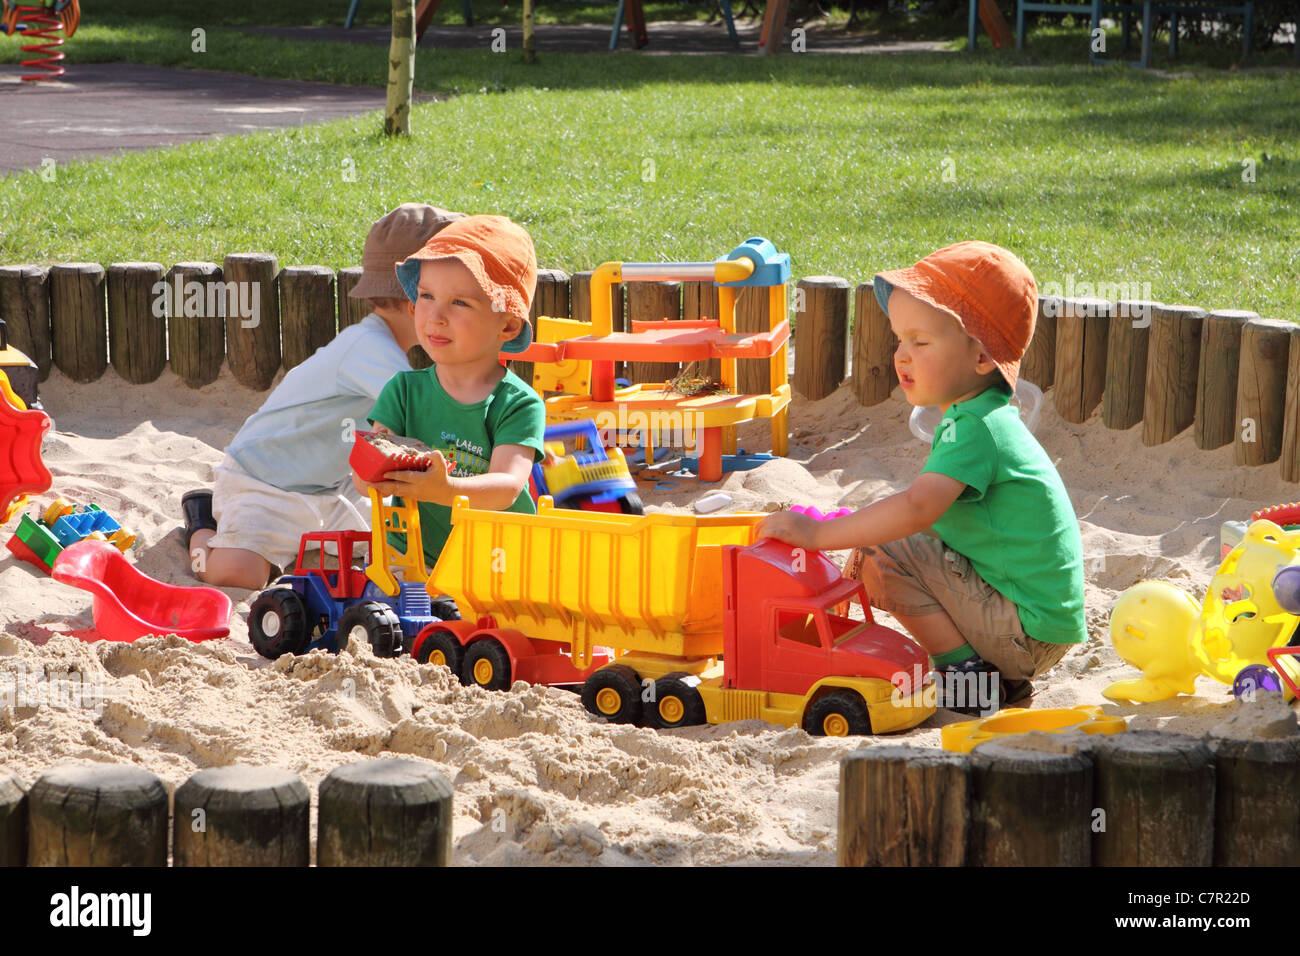 Young children playing in a sandpit with toys Stock Photo